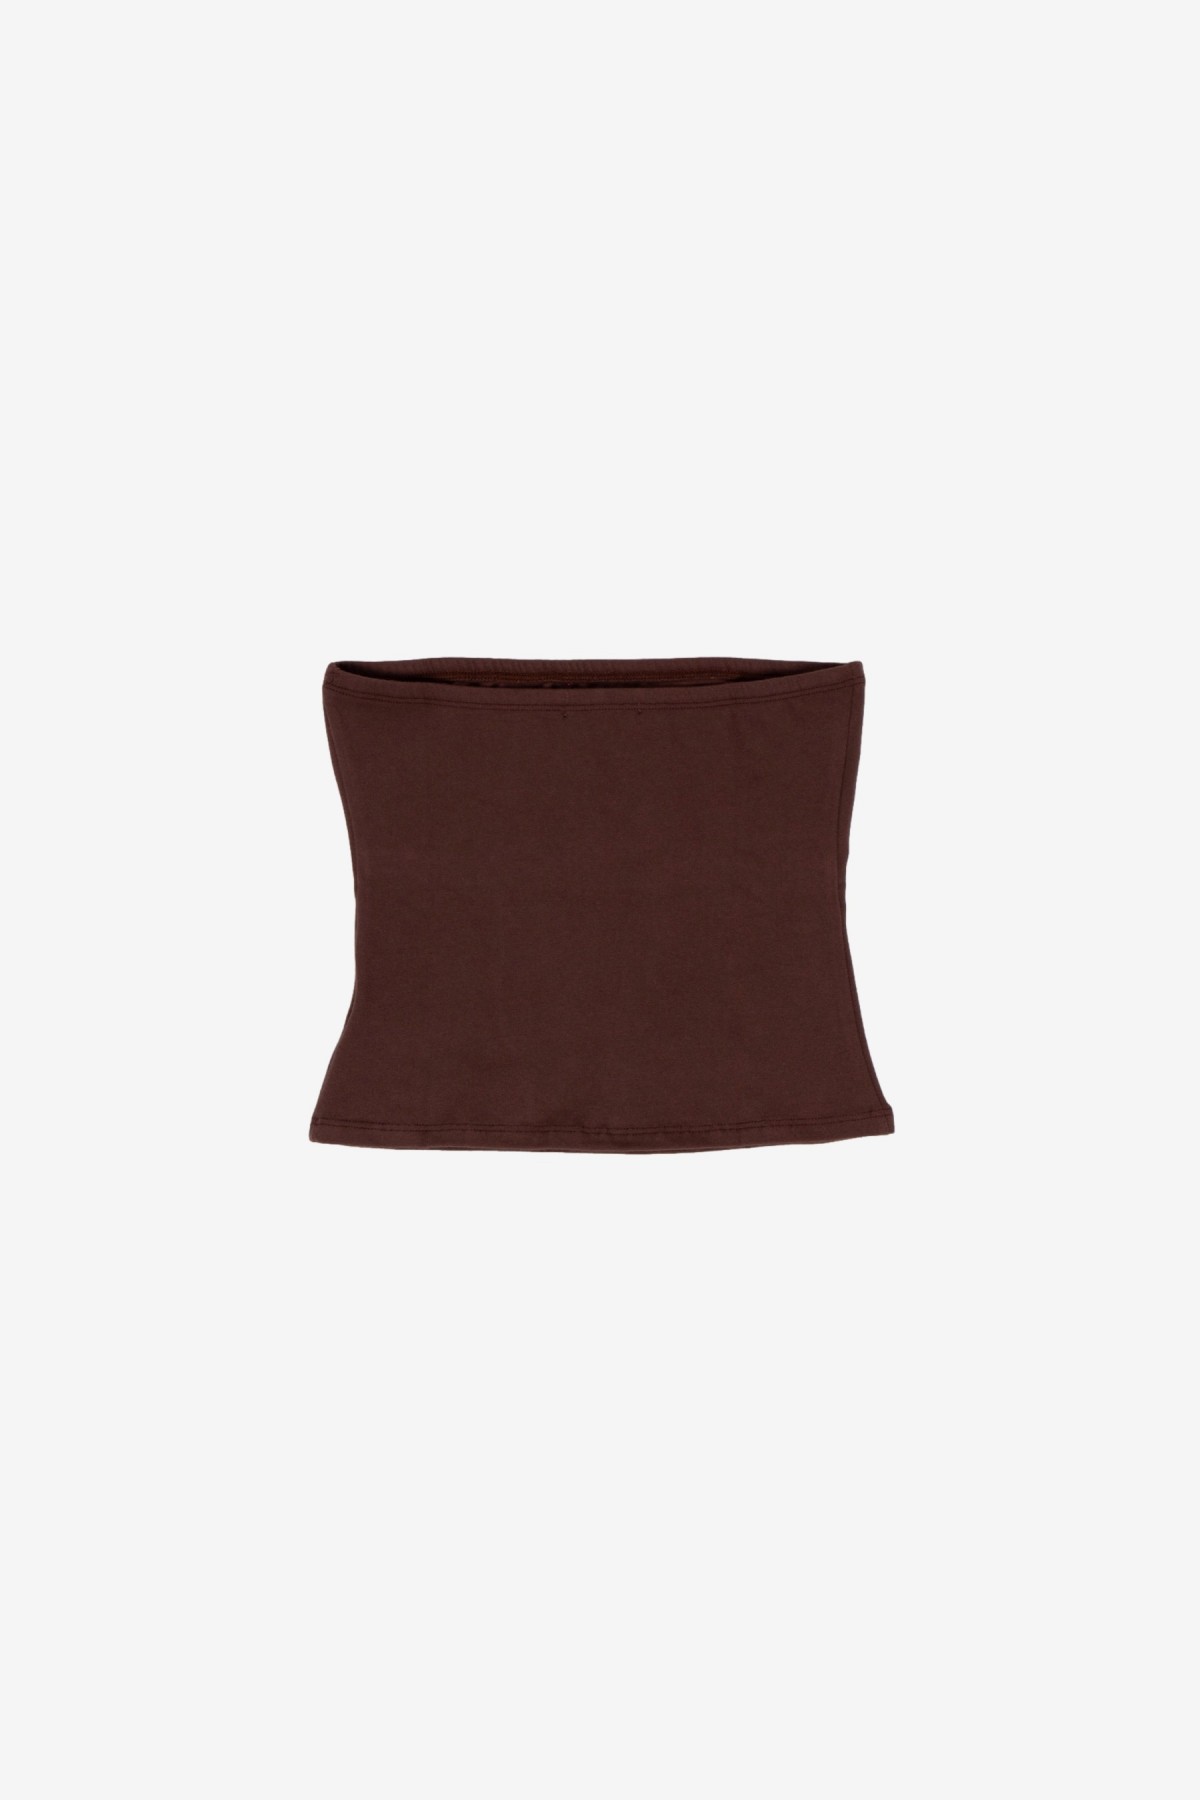 Gil Rodriguez The Tube Convertible Top in Chocolate